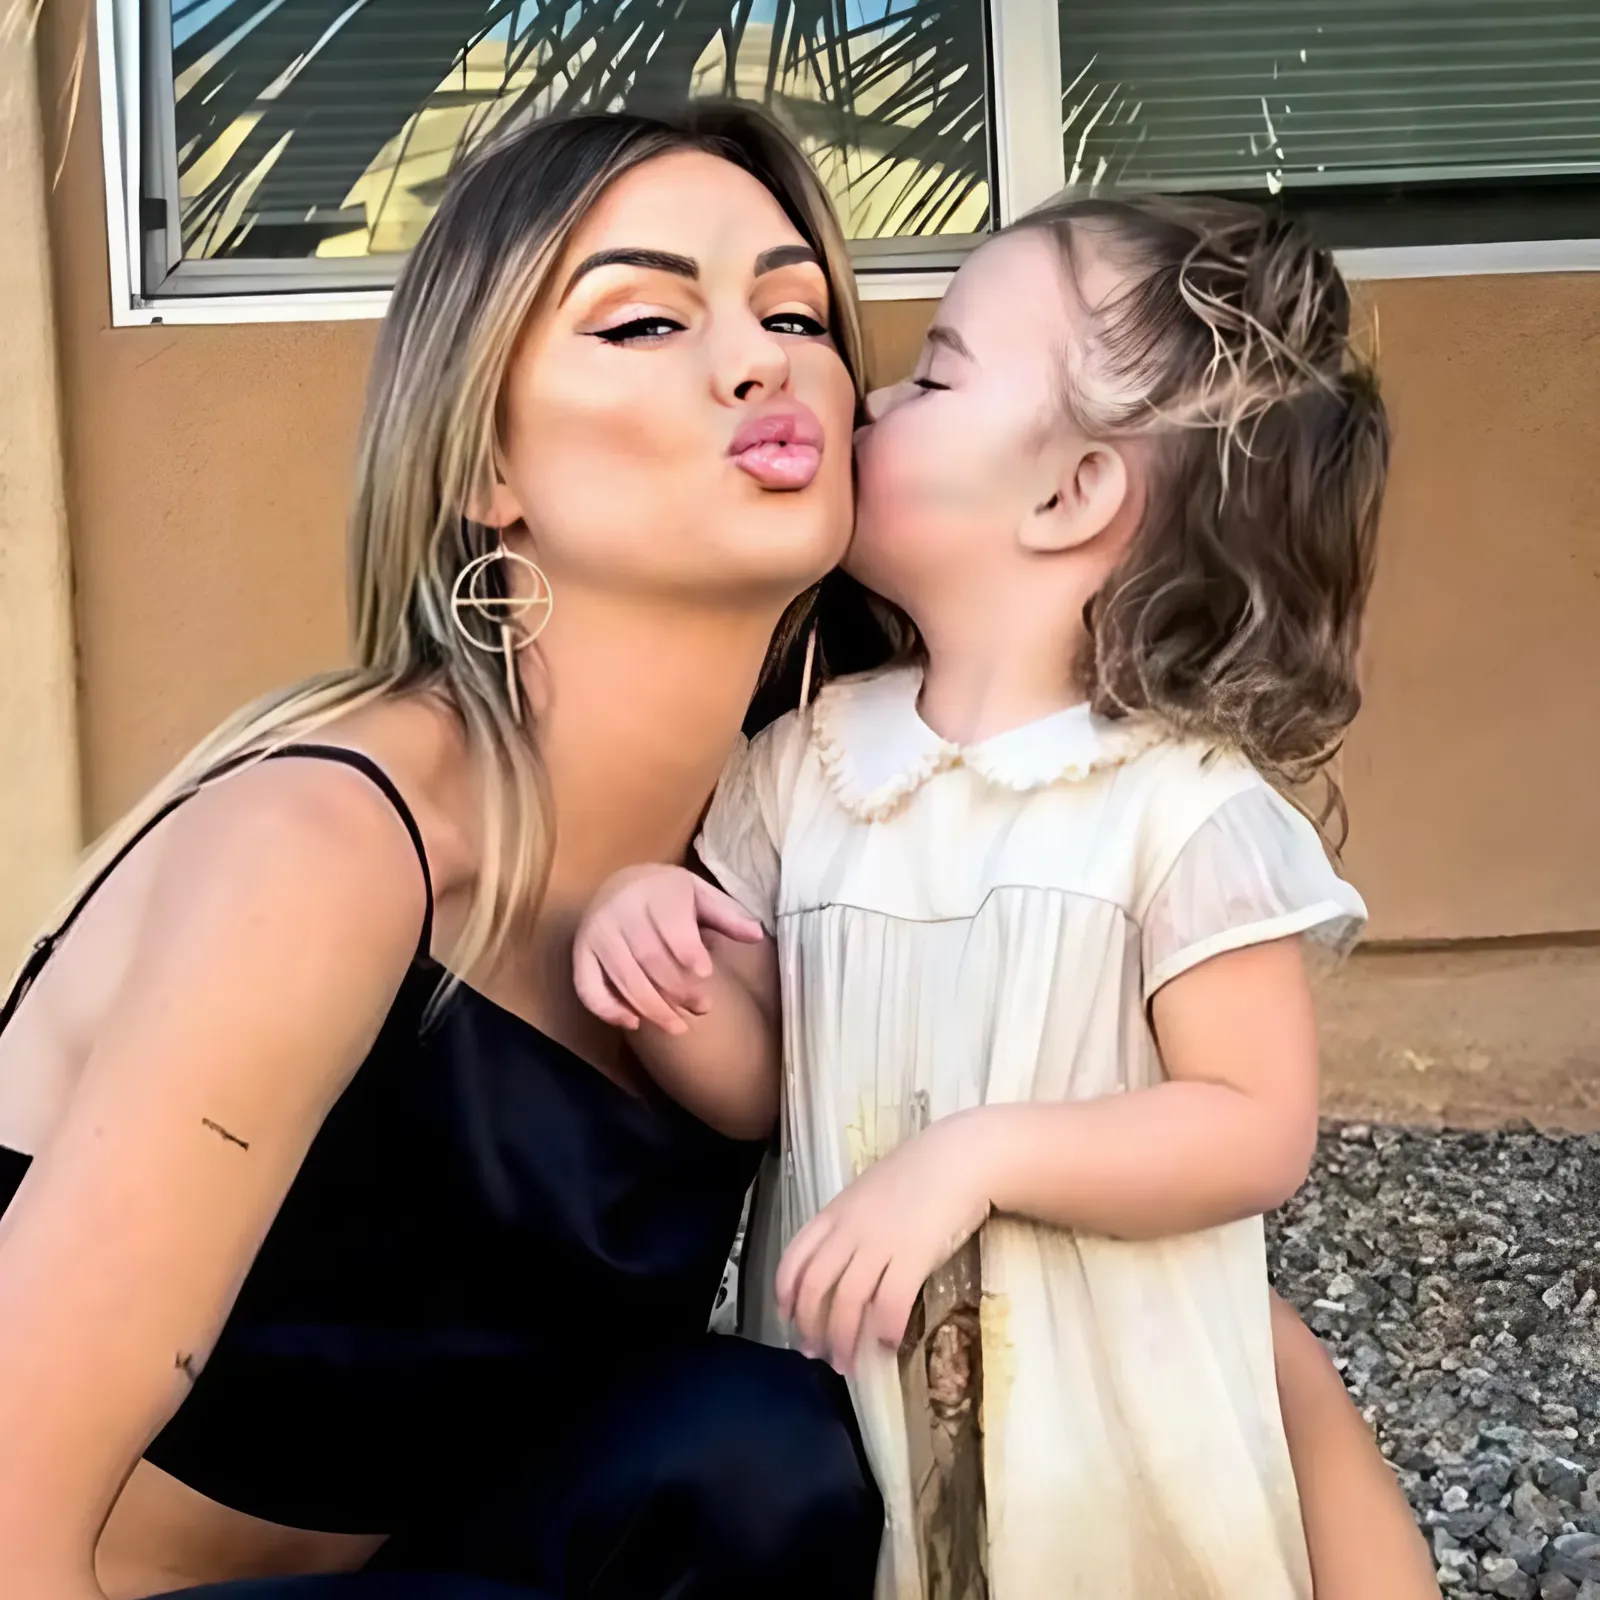 Look Back at Lala Kent and Daughter Ocean's Sweet Bond Before She Gives Birth to Baby No. 2